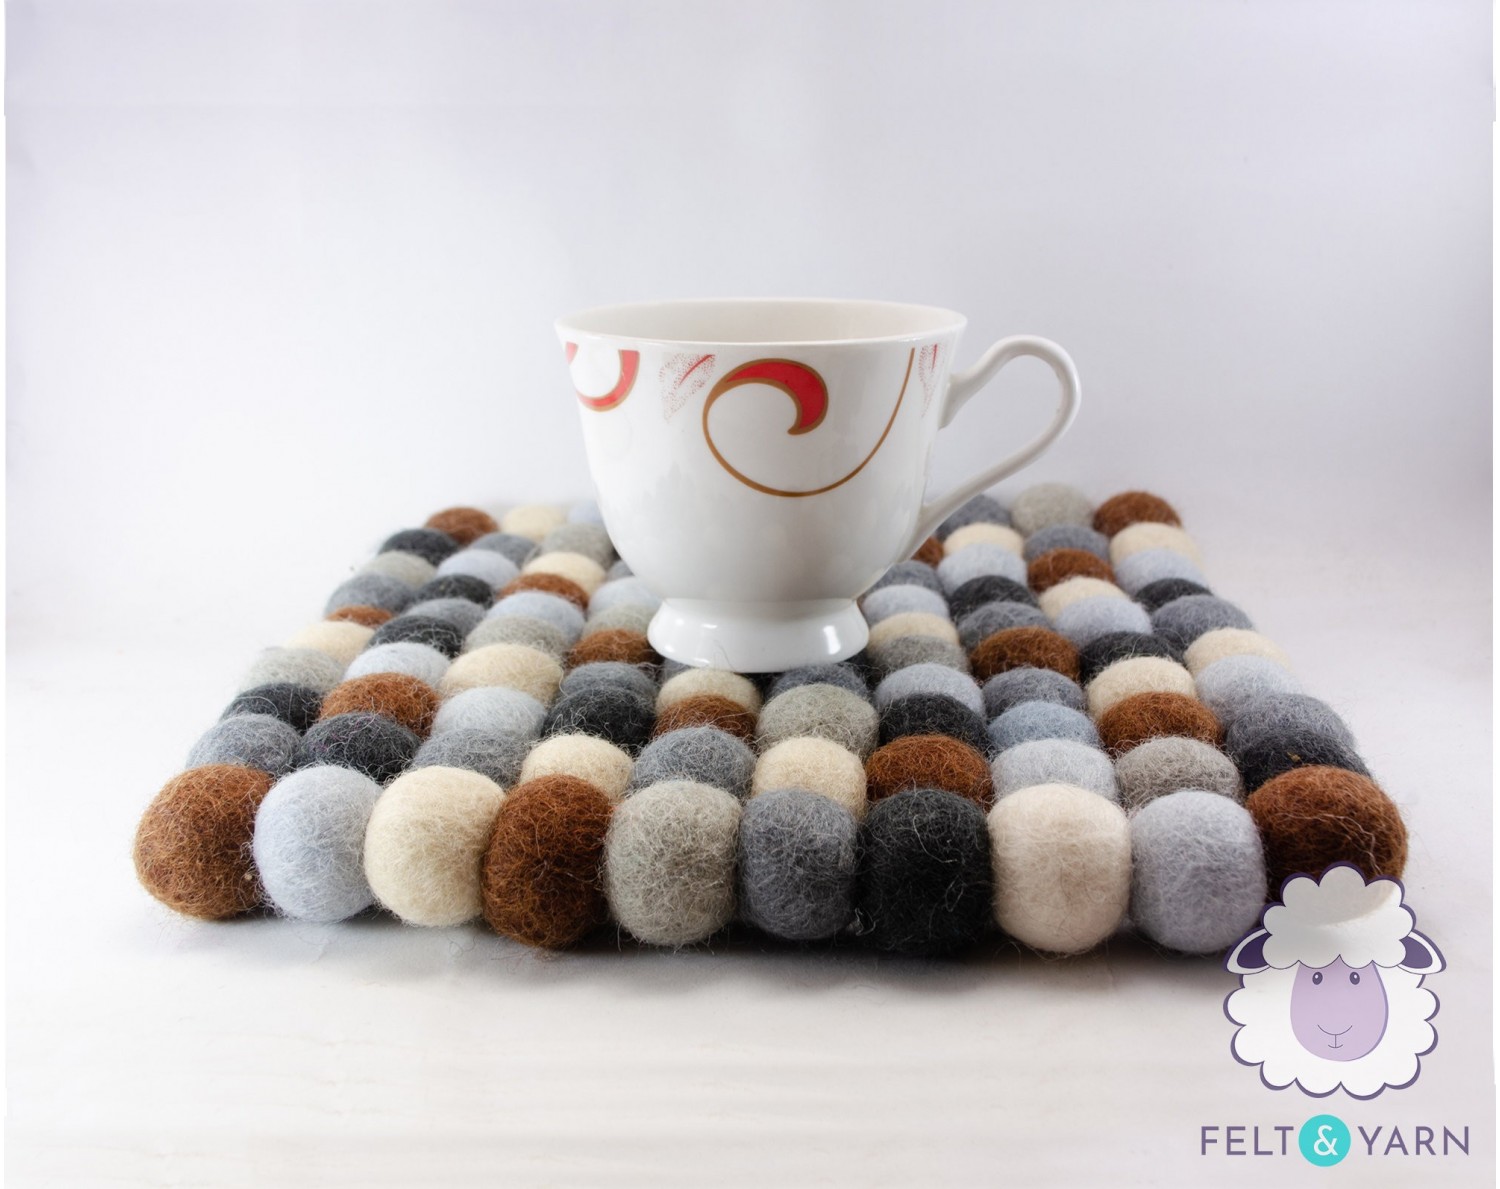 Best Felt Tea Accessories for your Guests - Felt & yarn